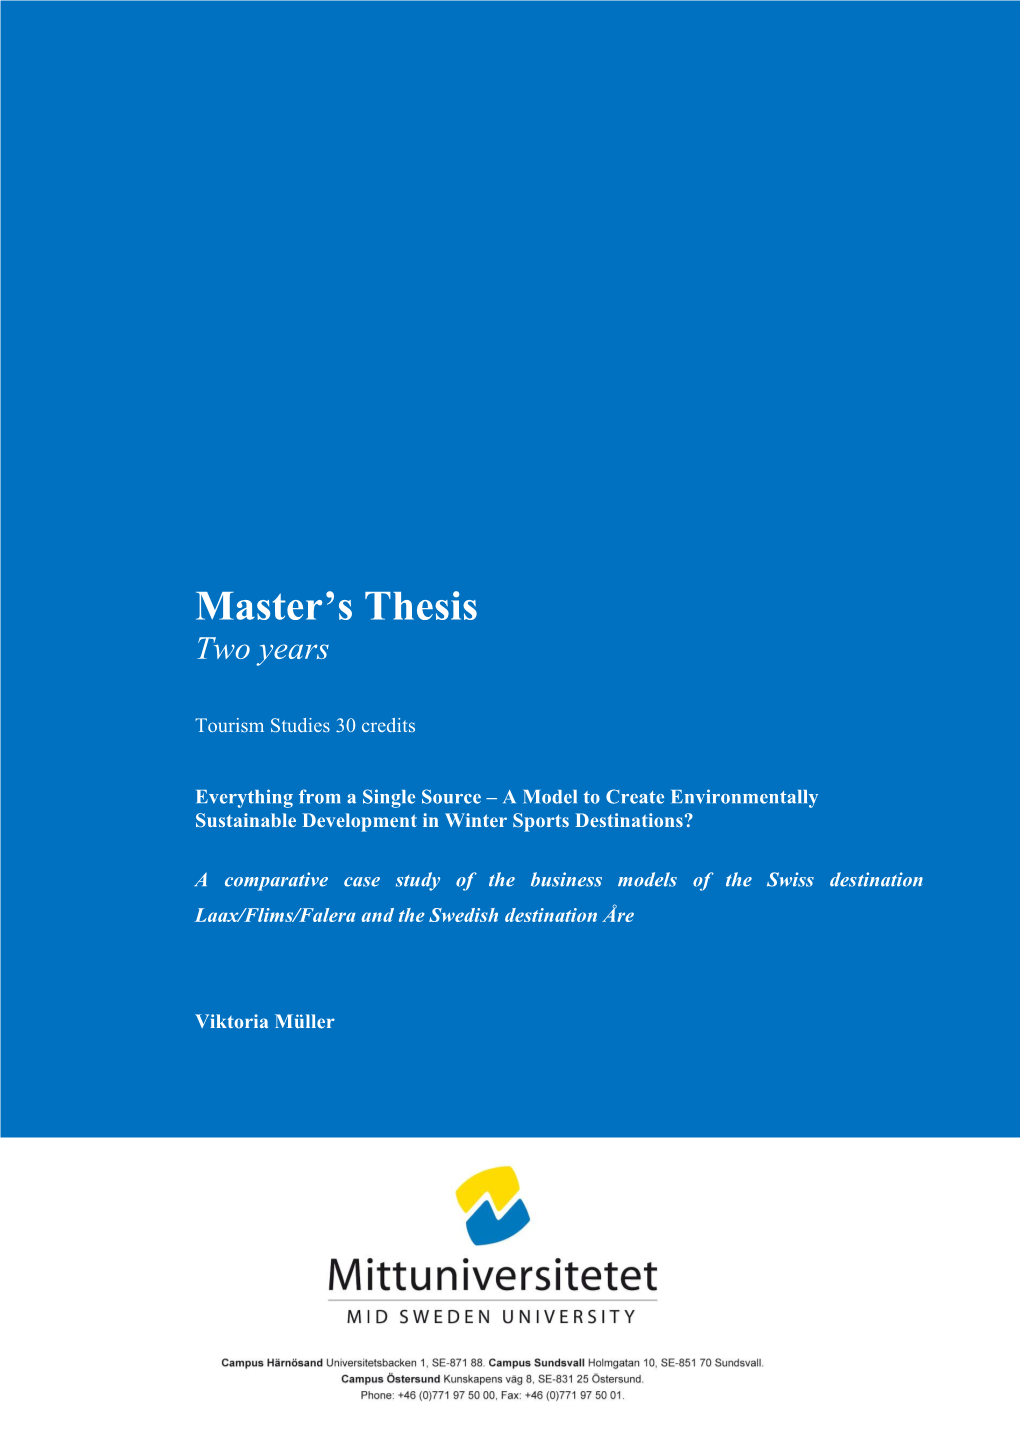 Master's Thesis Submitted to Mid-Sweden University in Partial Fulfillment of the Requirements for the Degree of Master in Tourism February 2014